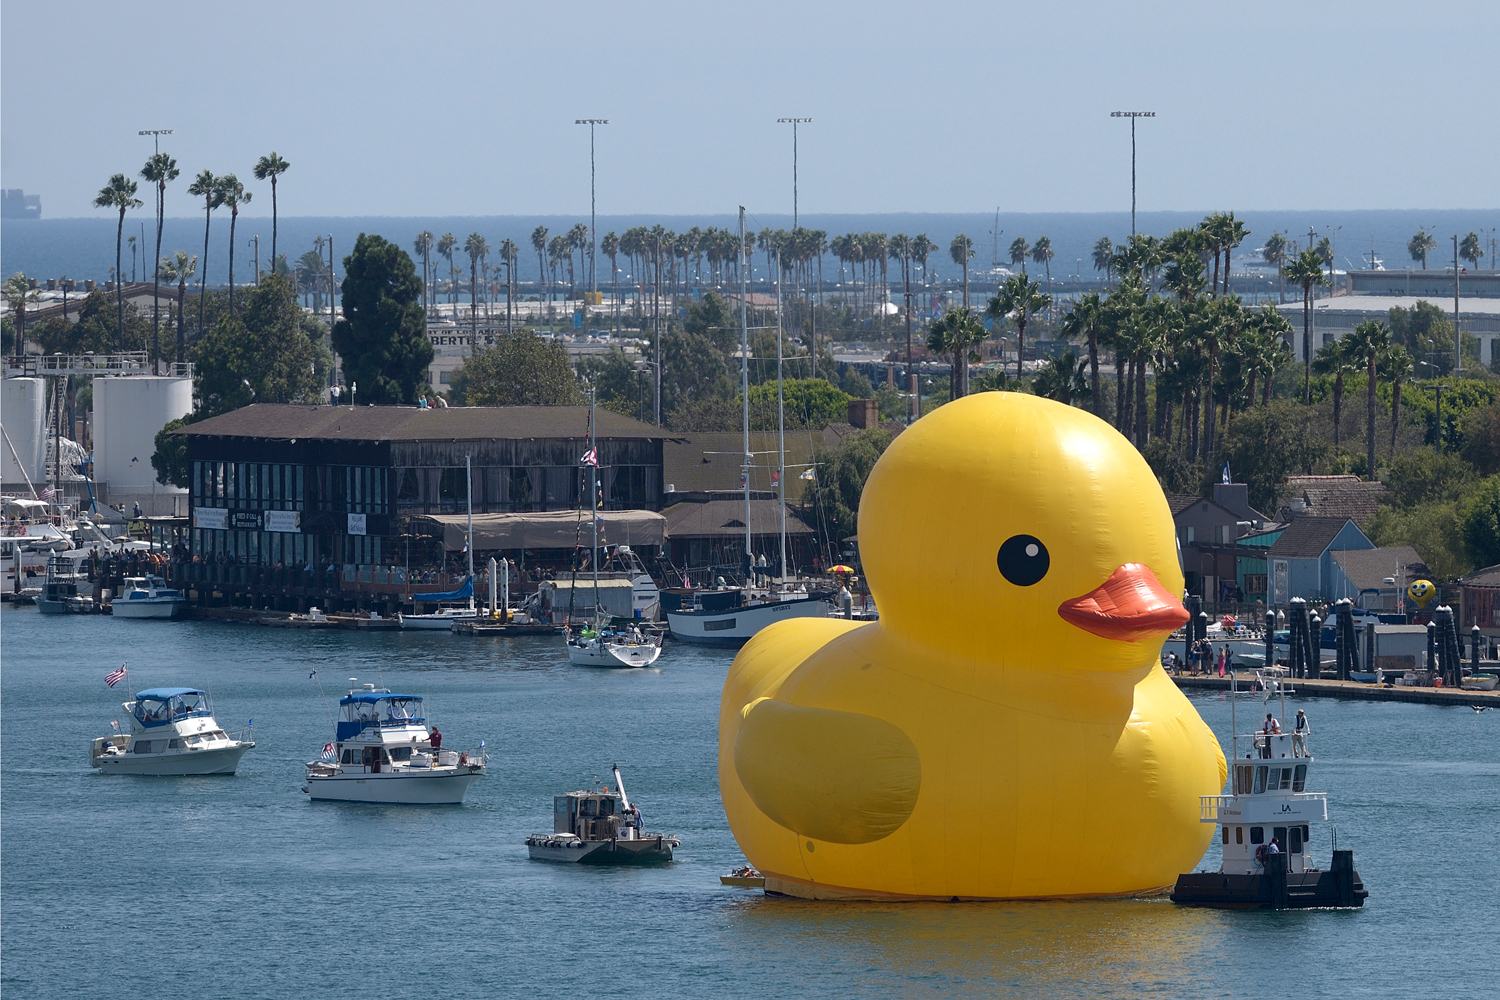 A giant yellow vinyl duck joins sailing ships and motorboats during the Tall Ships Festival L.A. parade in the Port of Los Angeles on Wednesday, Aug. 20, 2014. (Jeff Gritchen/The Orange County Register – AP)